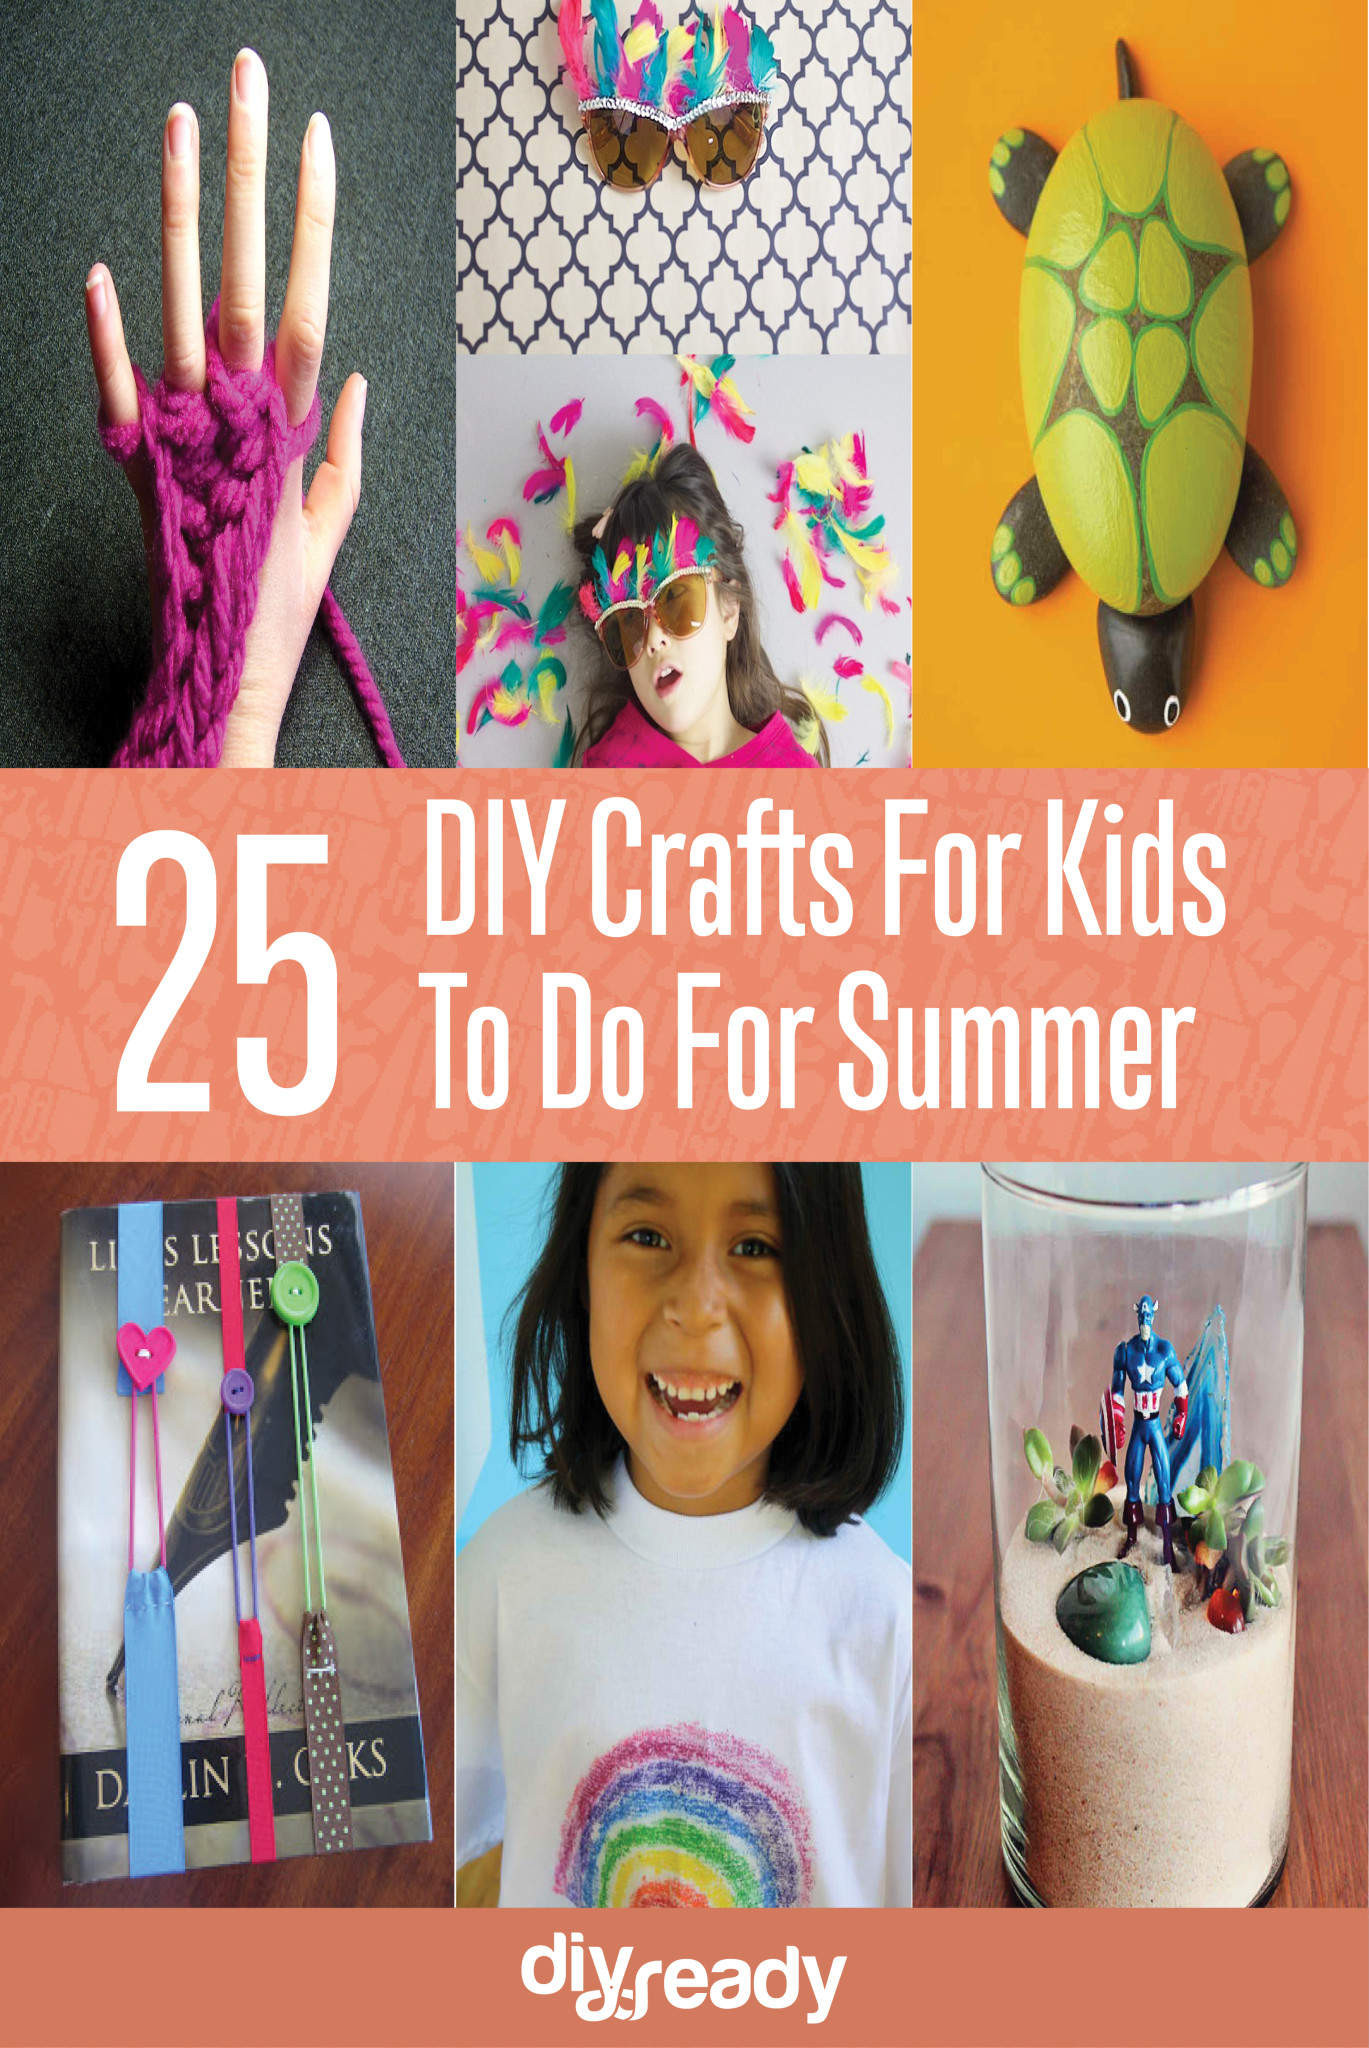 DIY Craft Projects For Kids
 Crafts for Kids DIY Projects Craft Ideas & How To’s for